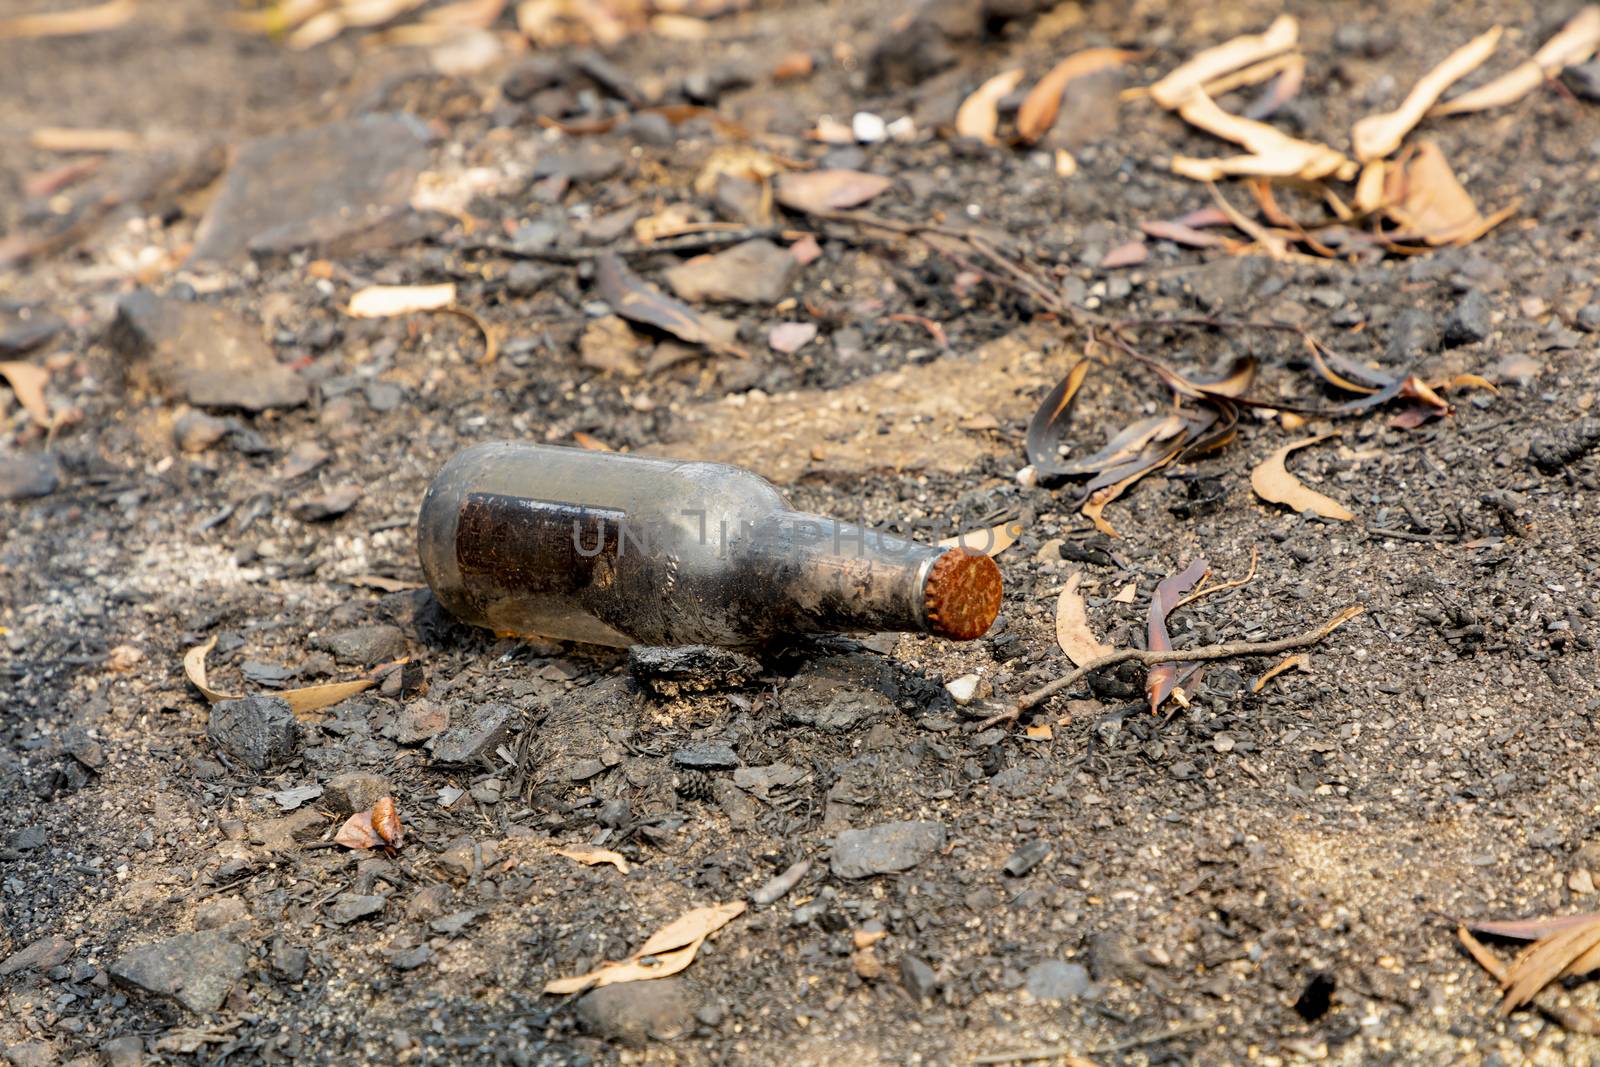 A glass drinking bottle on the ground after bushfires in regional Australia